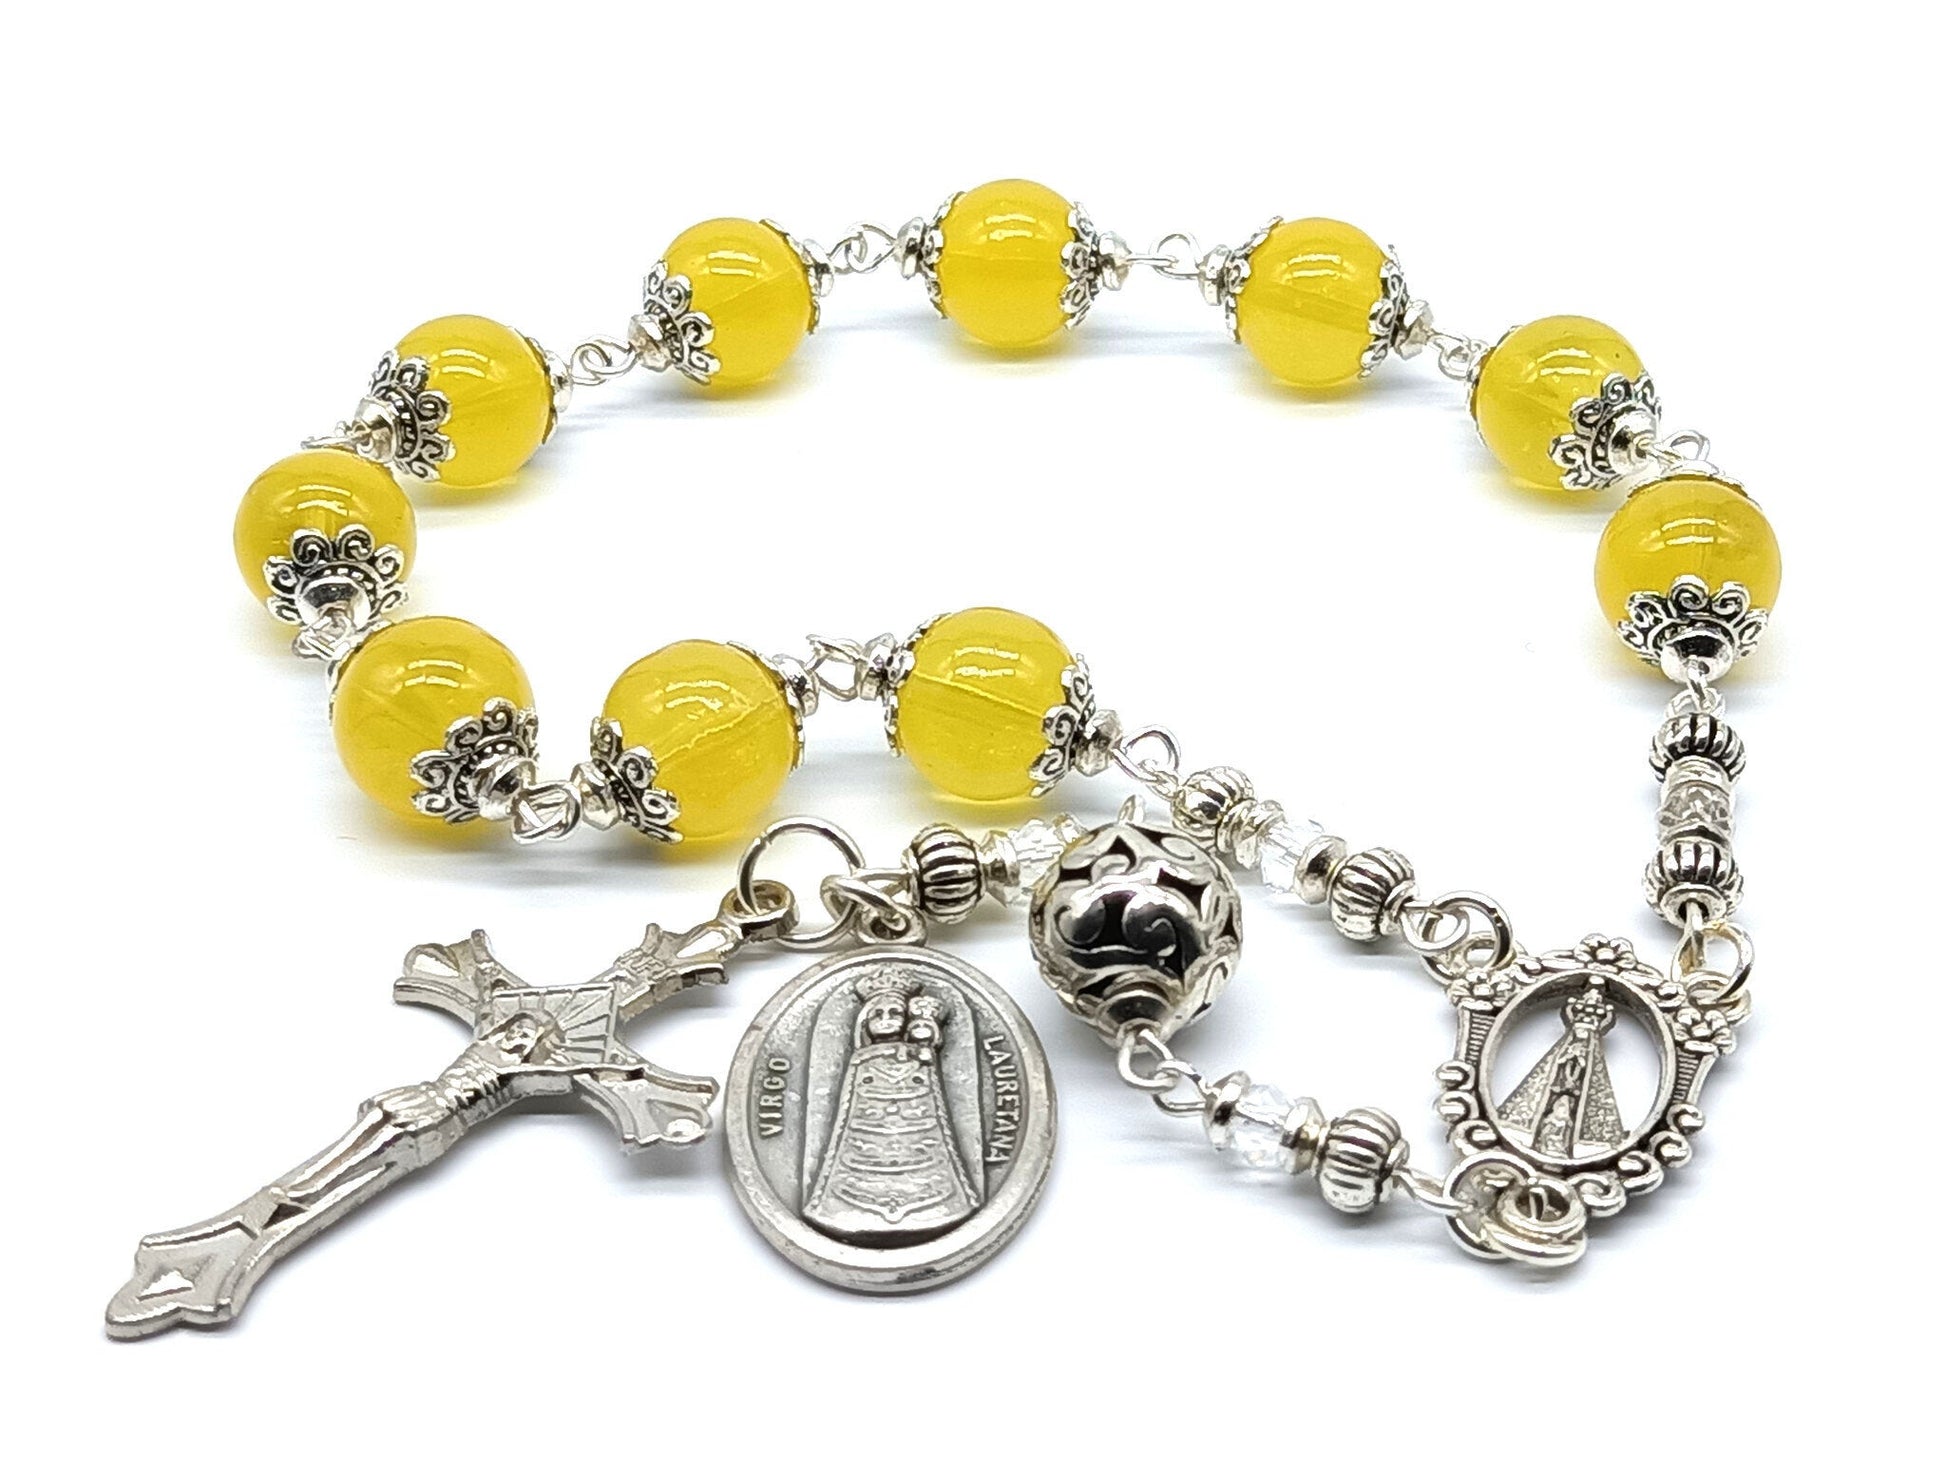 Our lady of Loretto unique rosary beads single decade with yellow glass beads, silver crucifix, pater bead and Virgo Lauretana centre medal.